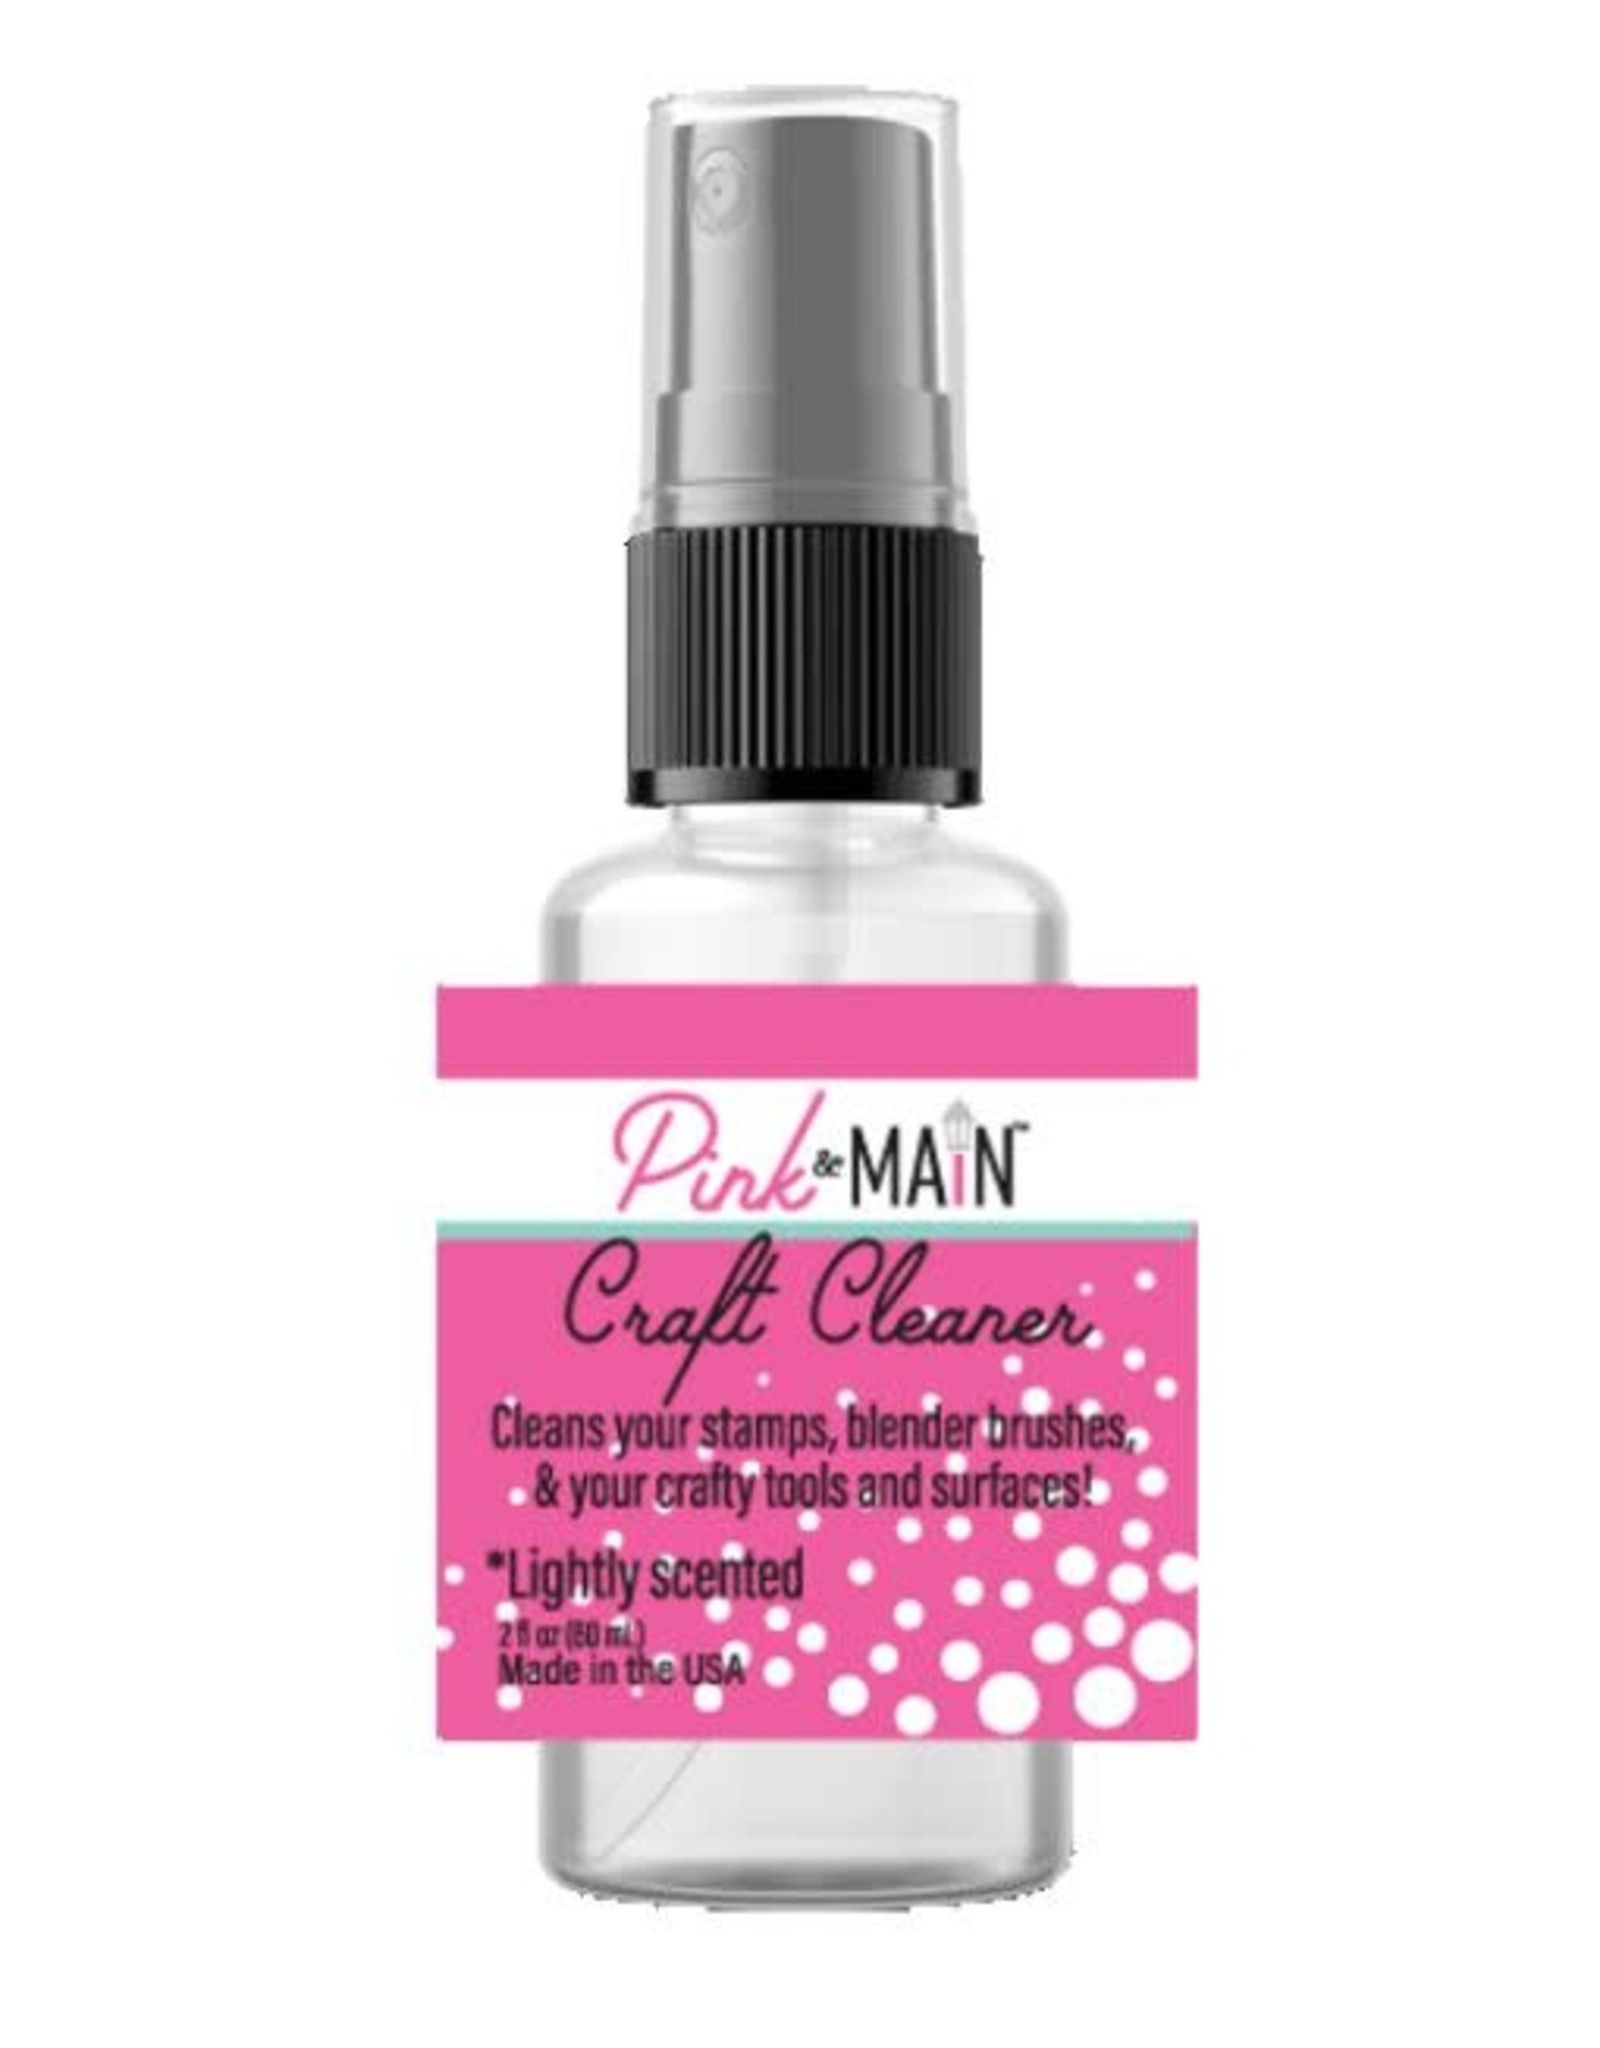 Pink & Main Crafty Cleaner